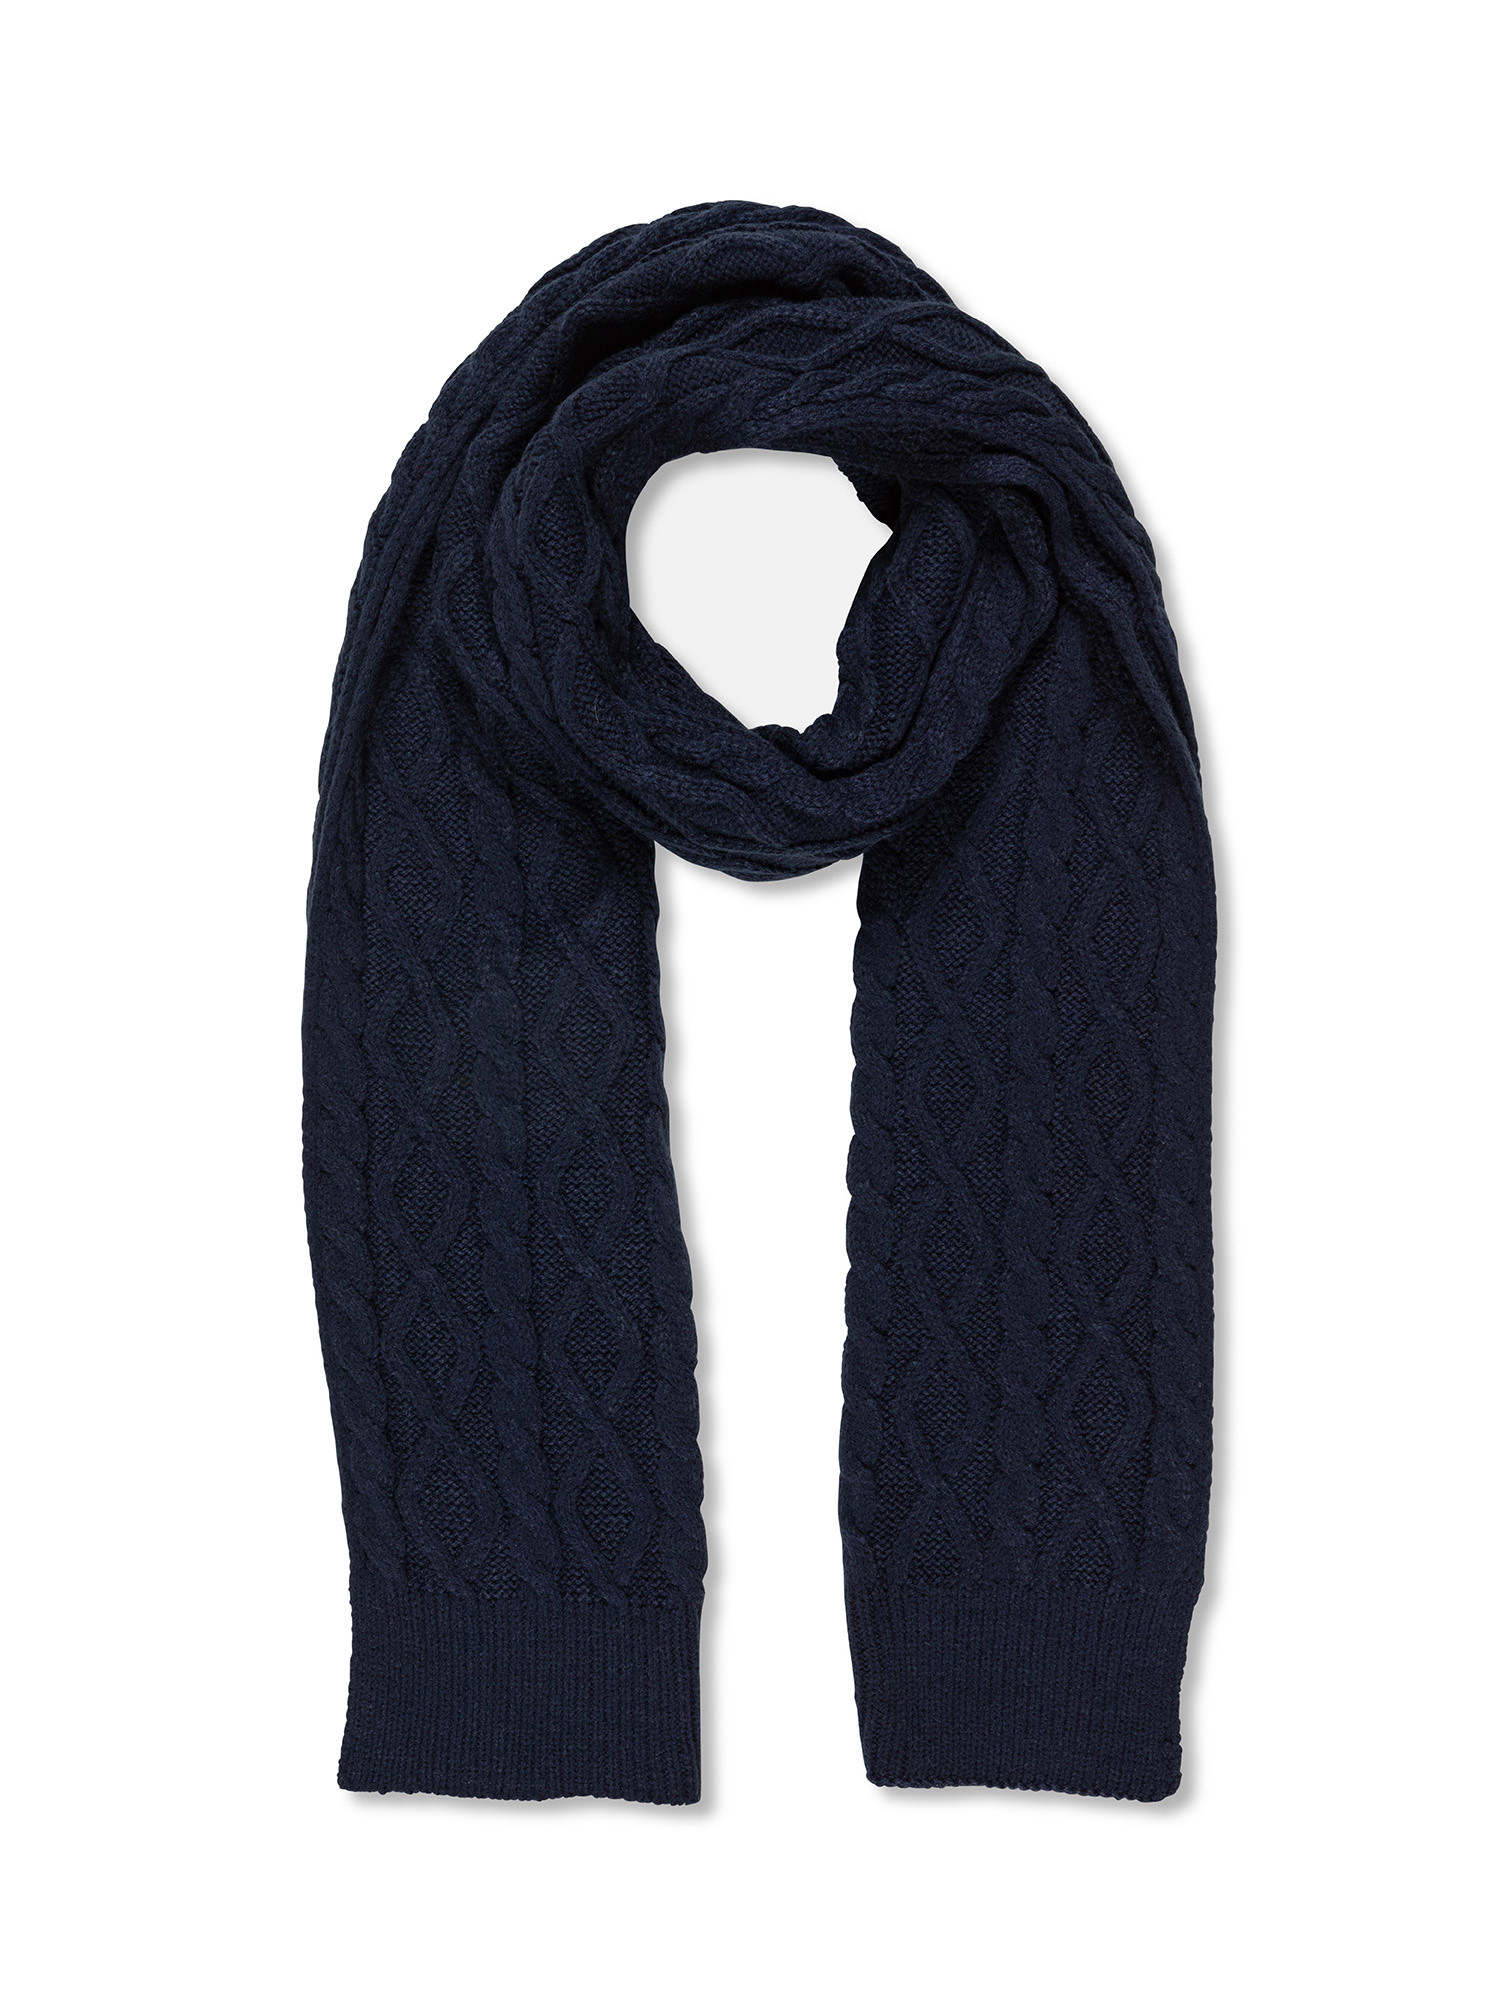 Luca D'Altieri - Scarf with knitted motif, Dark Blue, large image number 0